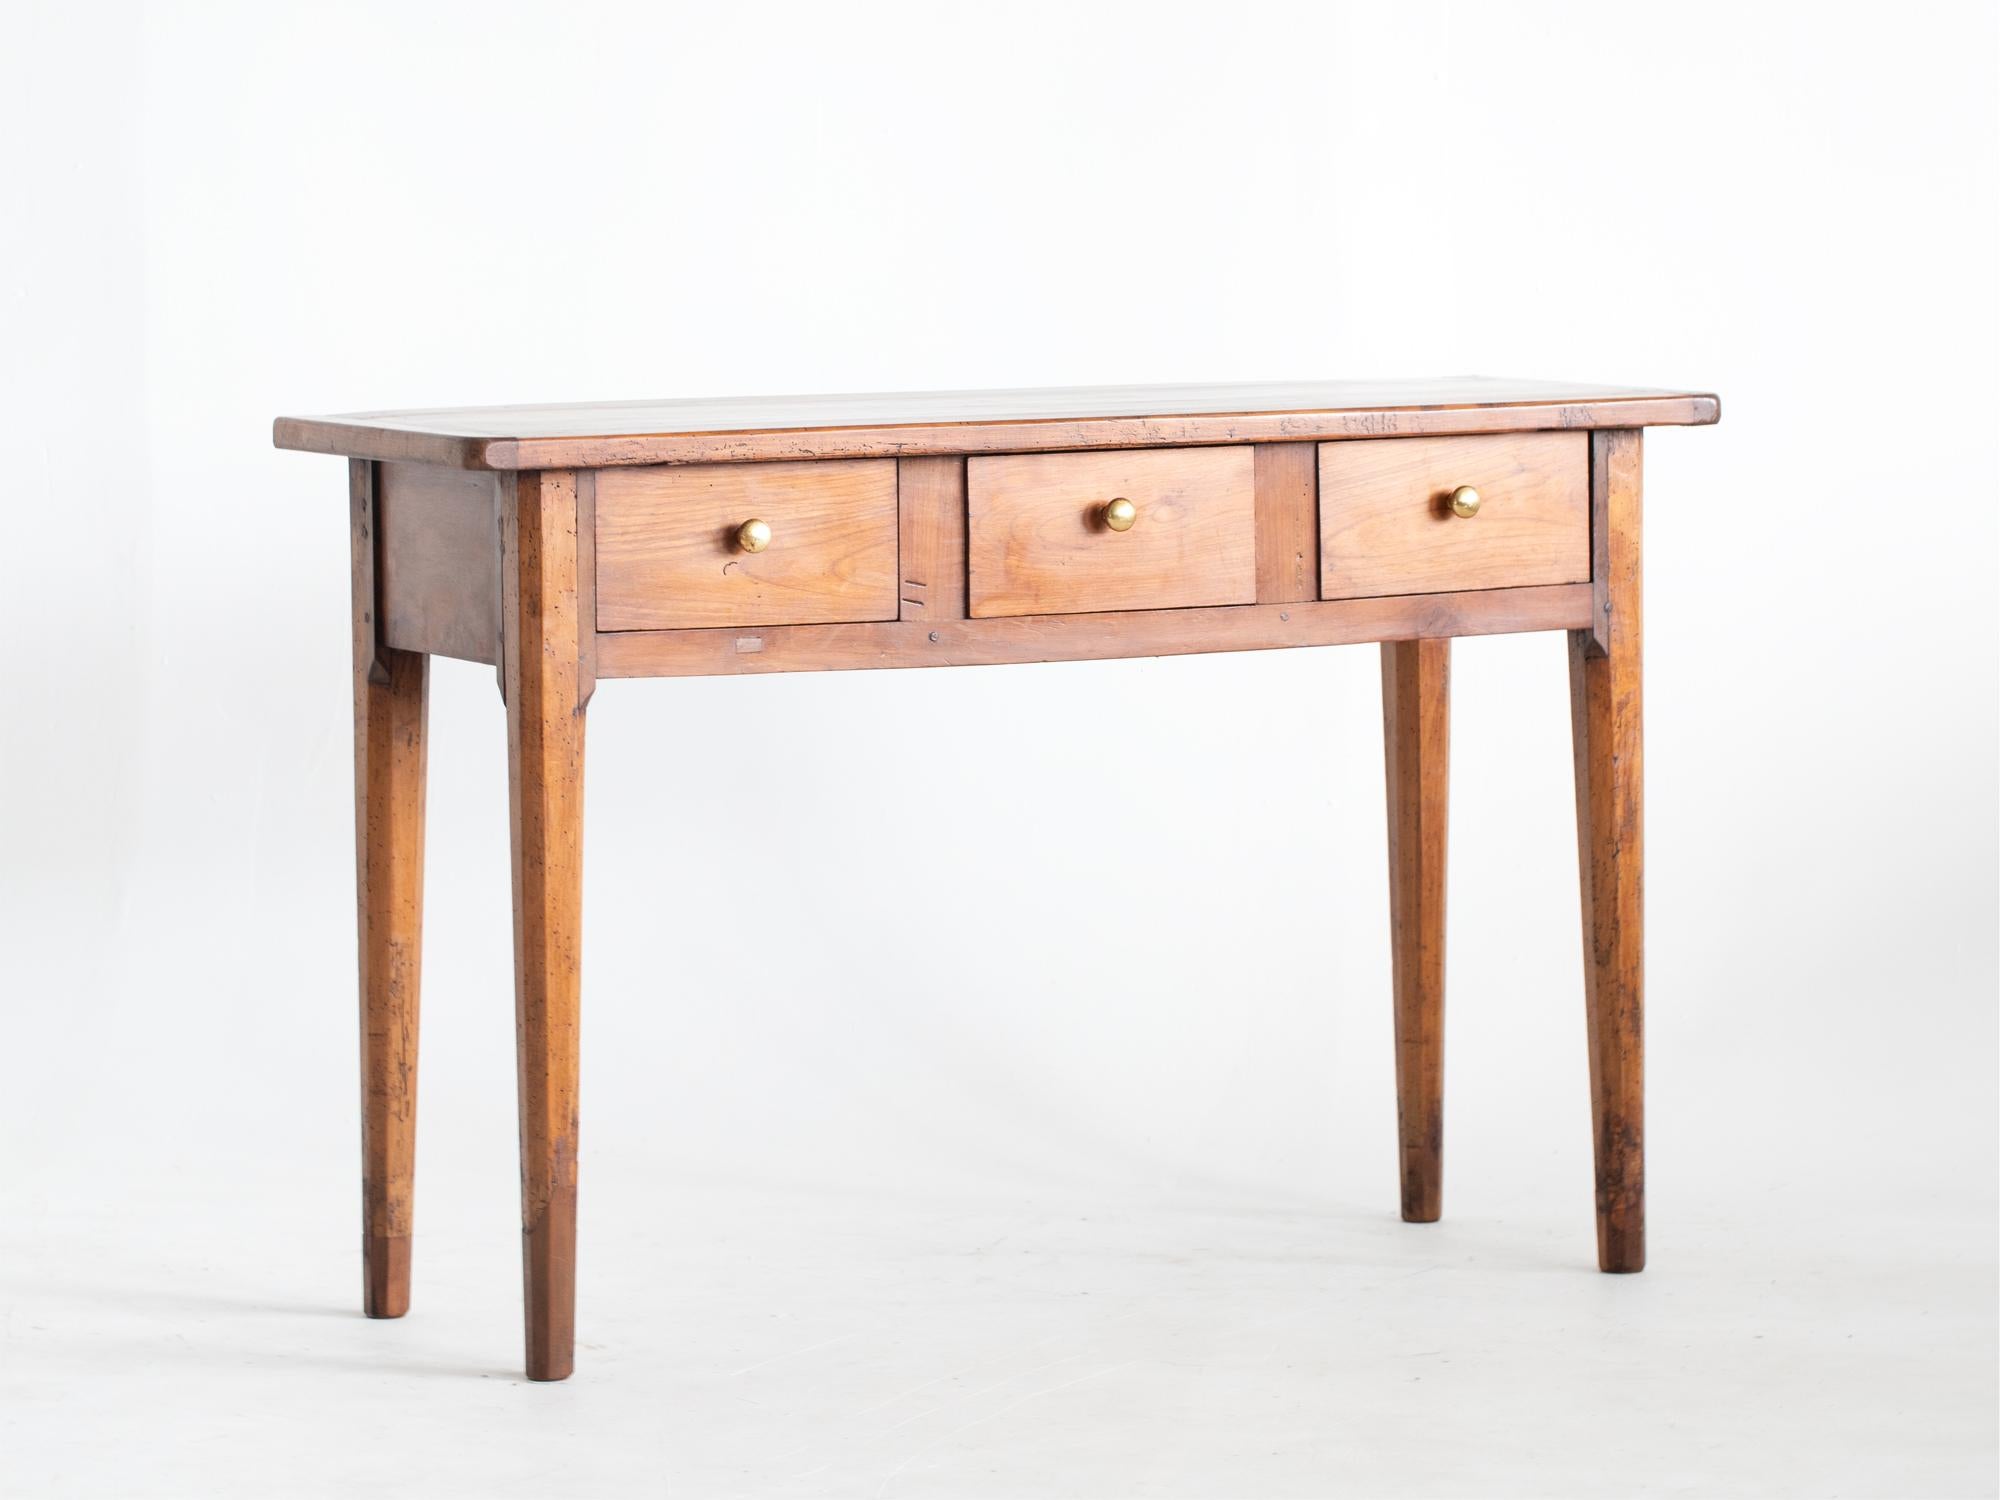 A three-drawer cherrywood serving table or console adapted from a larger antique French farmhouse table.

Stock ref. #2204

In good sturdy order. Beautiful colour and wear to the timber.

77.5 x 119.5 x 42.5 cm

30.5 x 47.0 x 16.7 